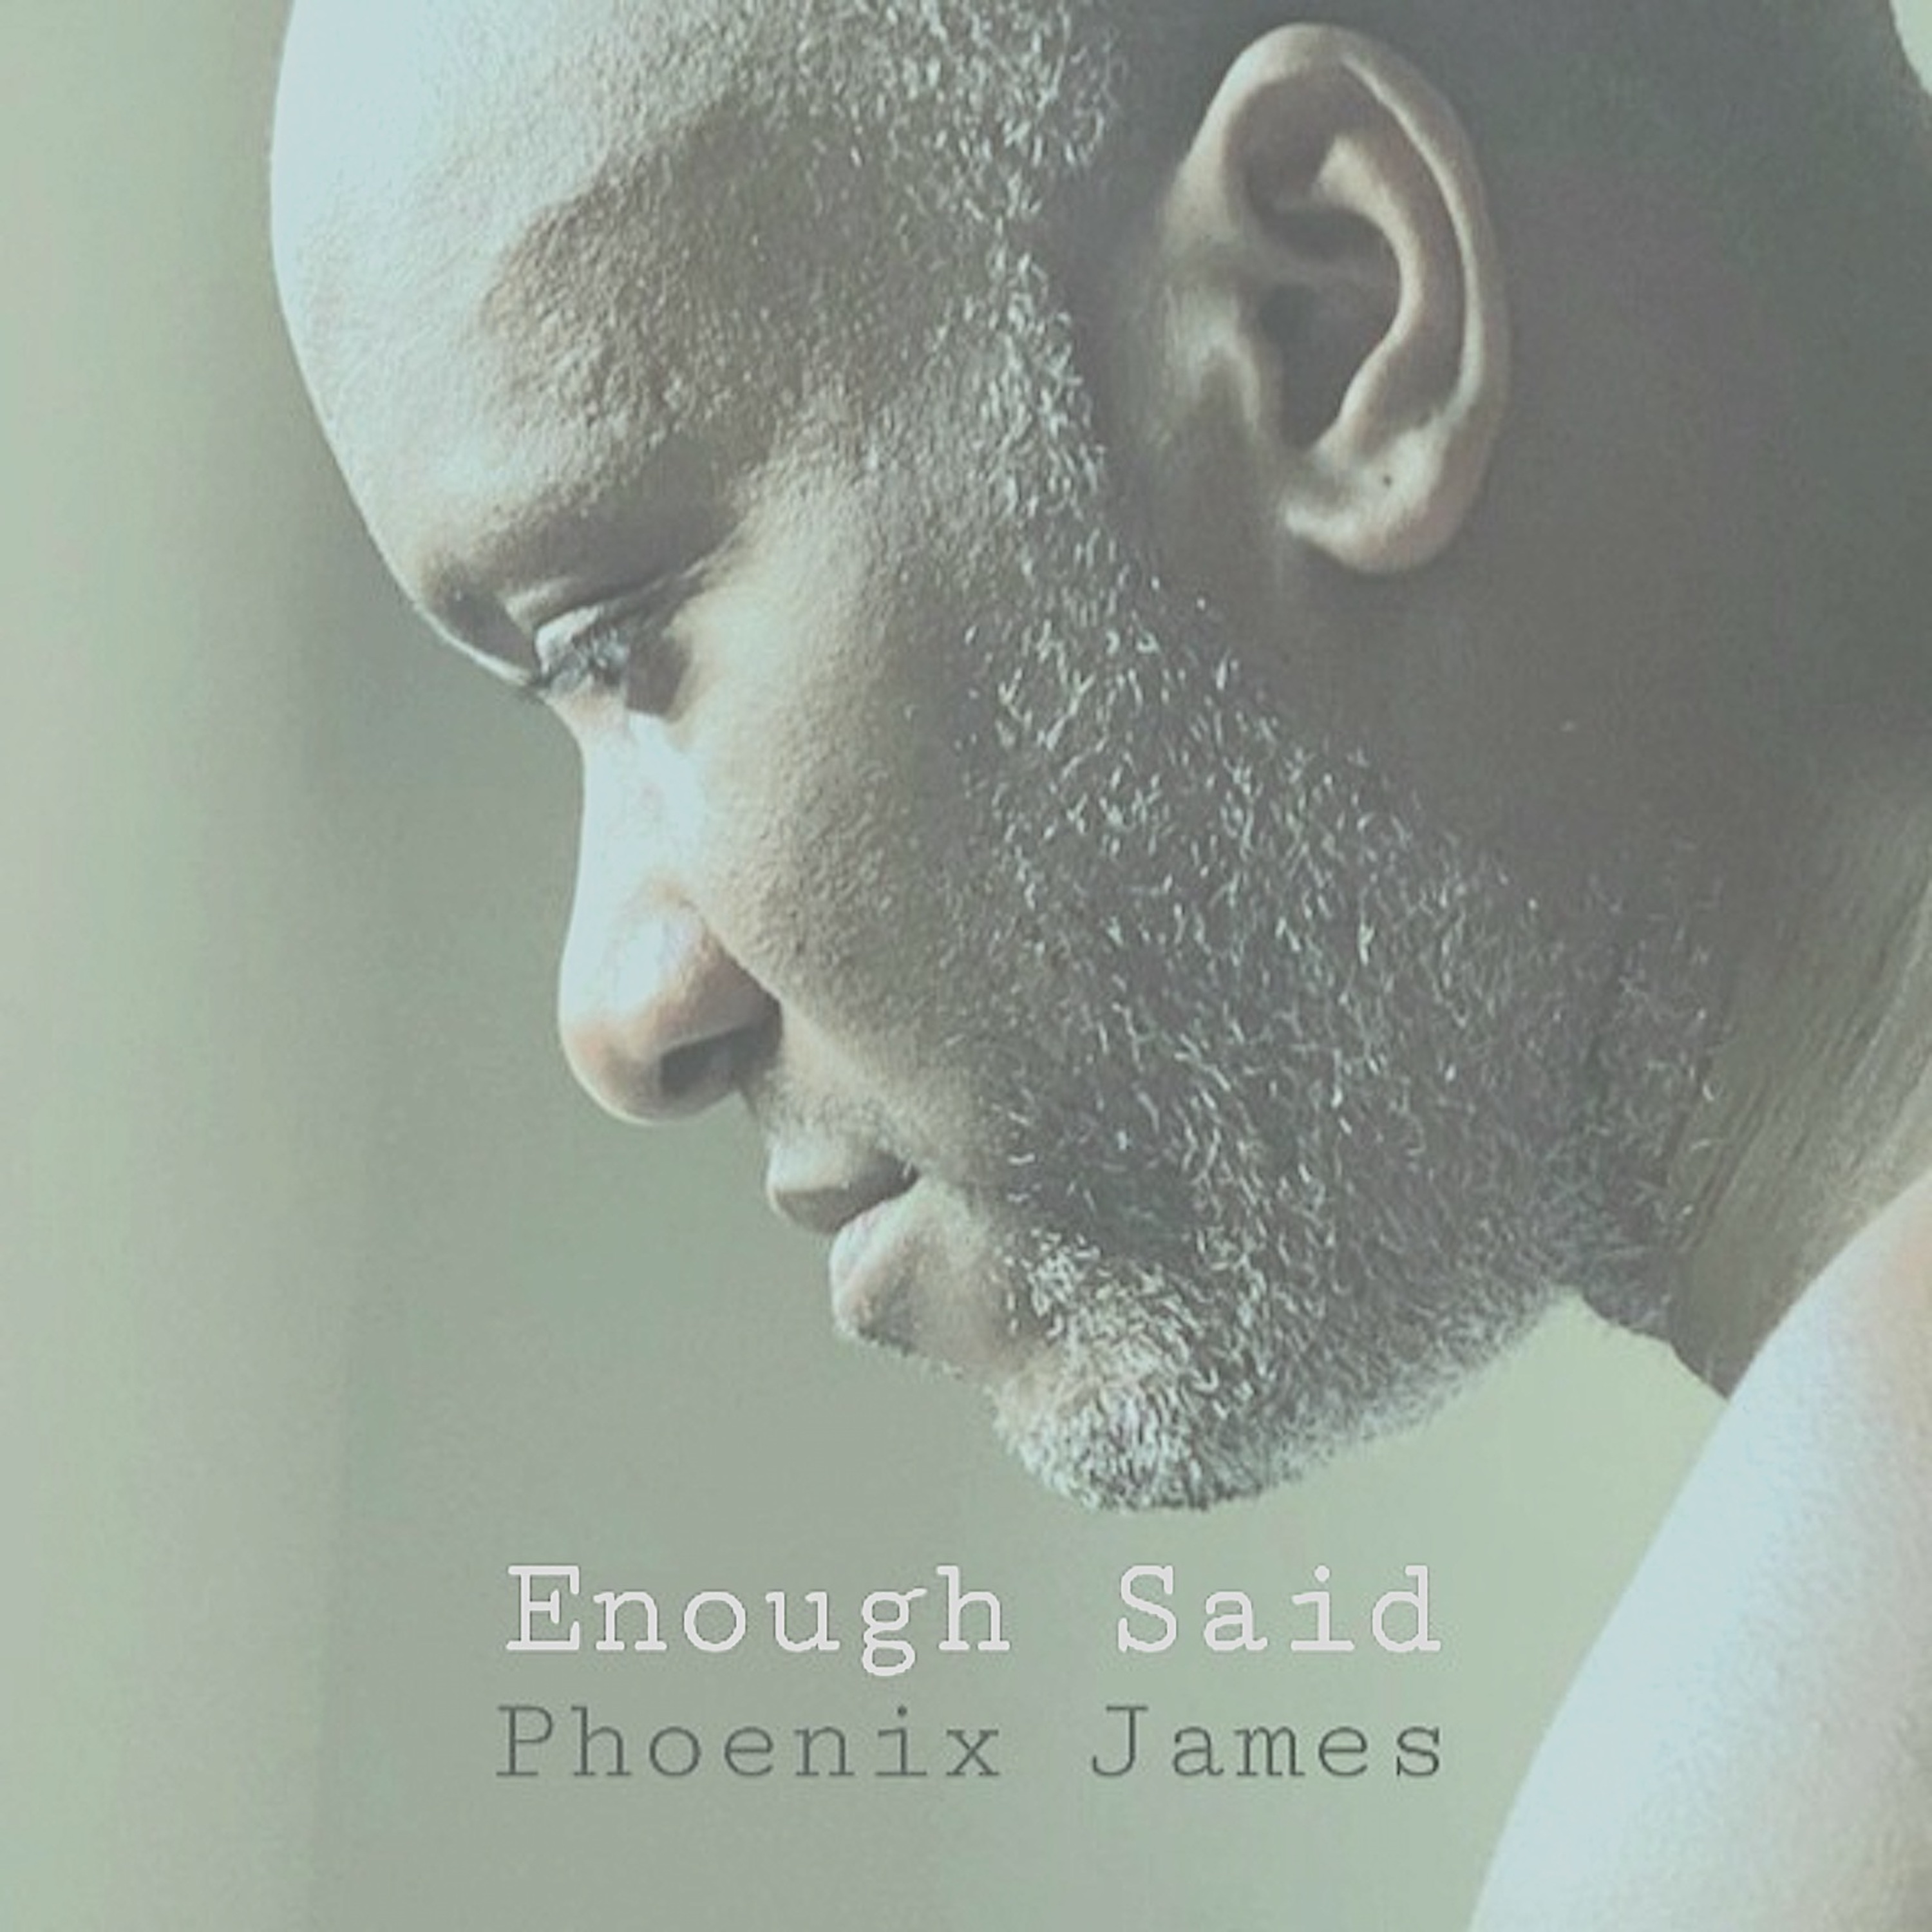 ENOUGH SAID SPOKEN WORD POETRY BY PHOENIX JAMES OFFICIAL PHENZWAAN